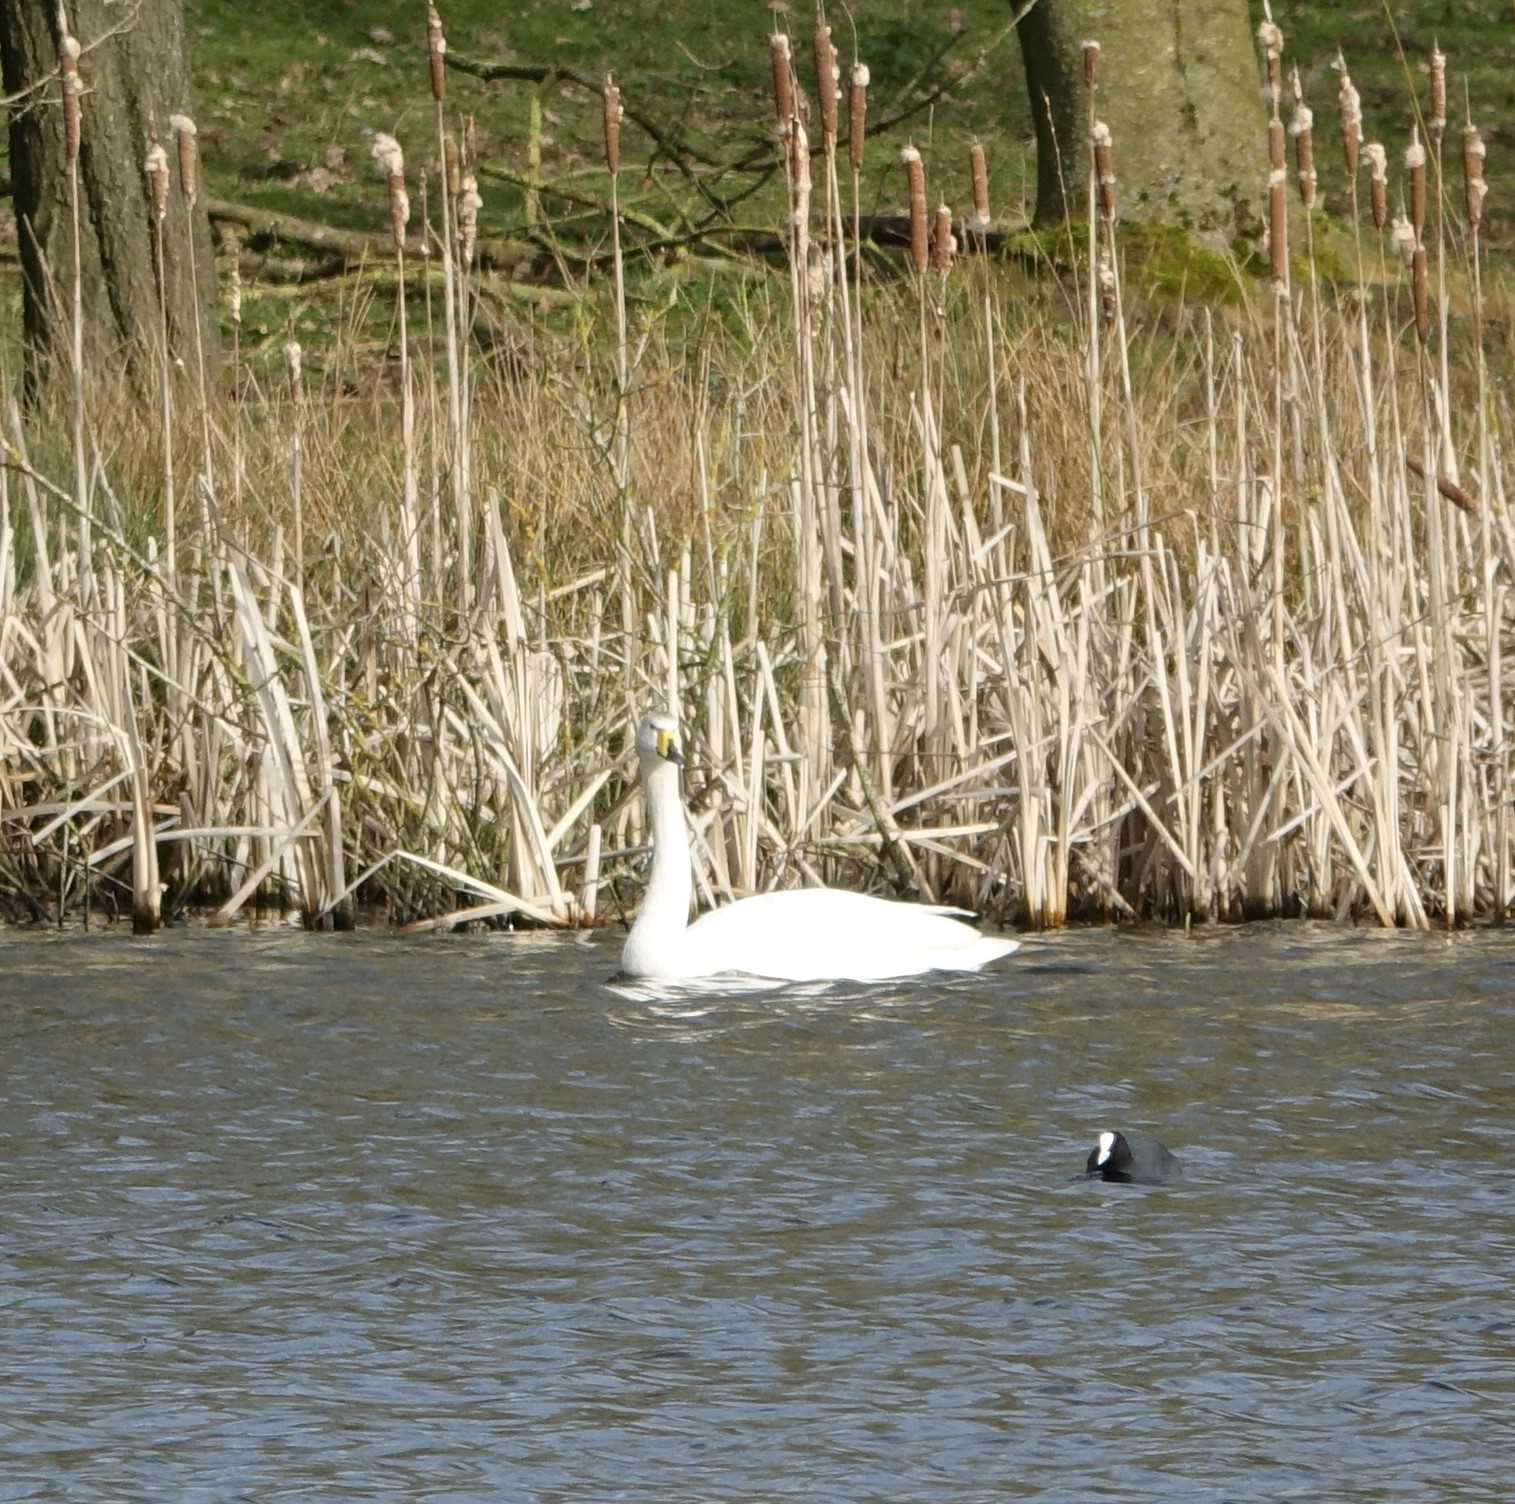 Whooper Swan at Woolfall Mere, March 25th 2021, picture by John Vickers